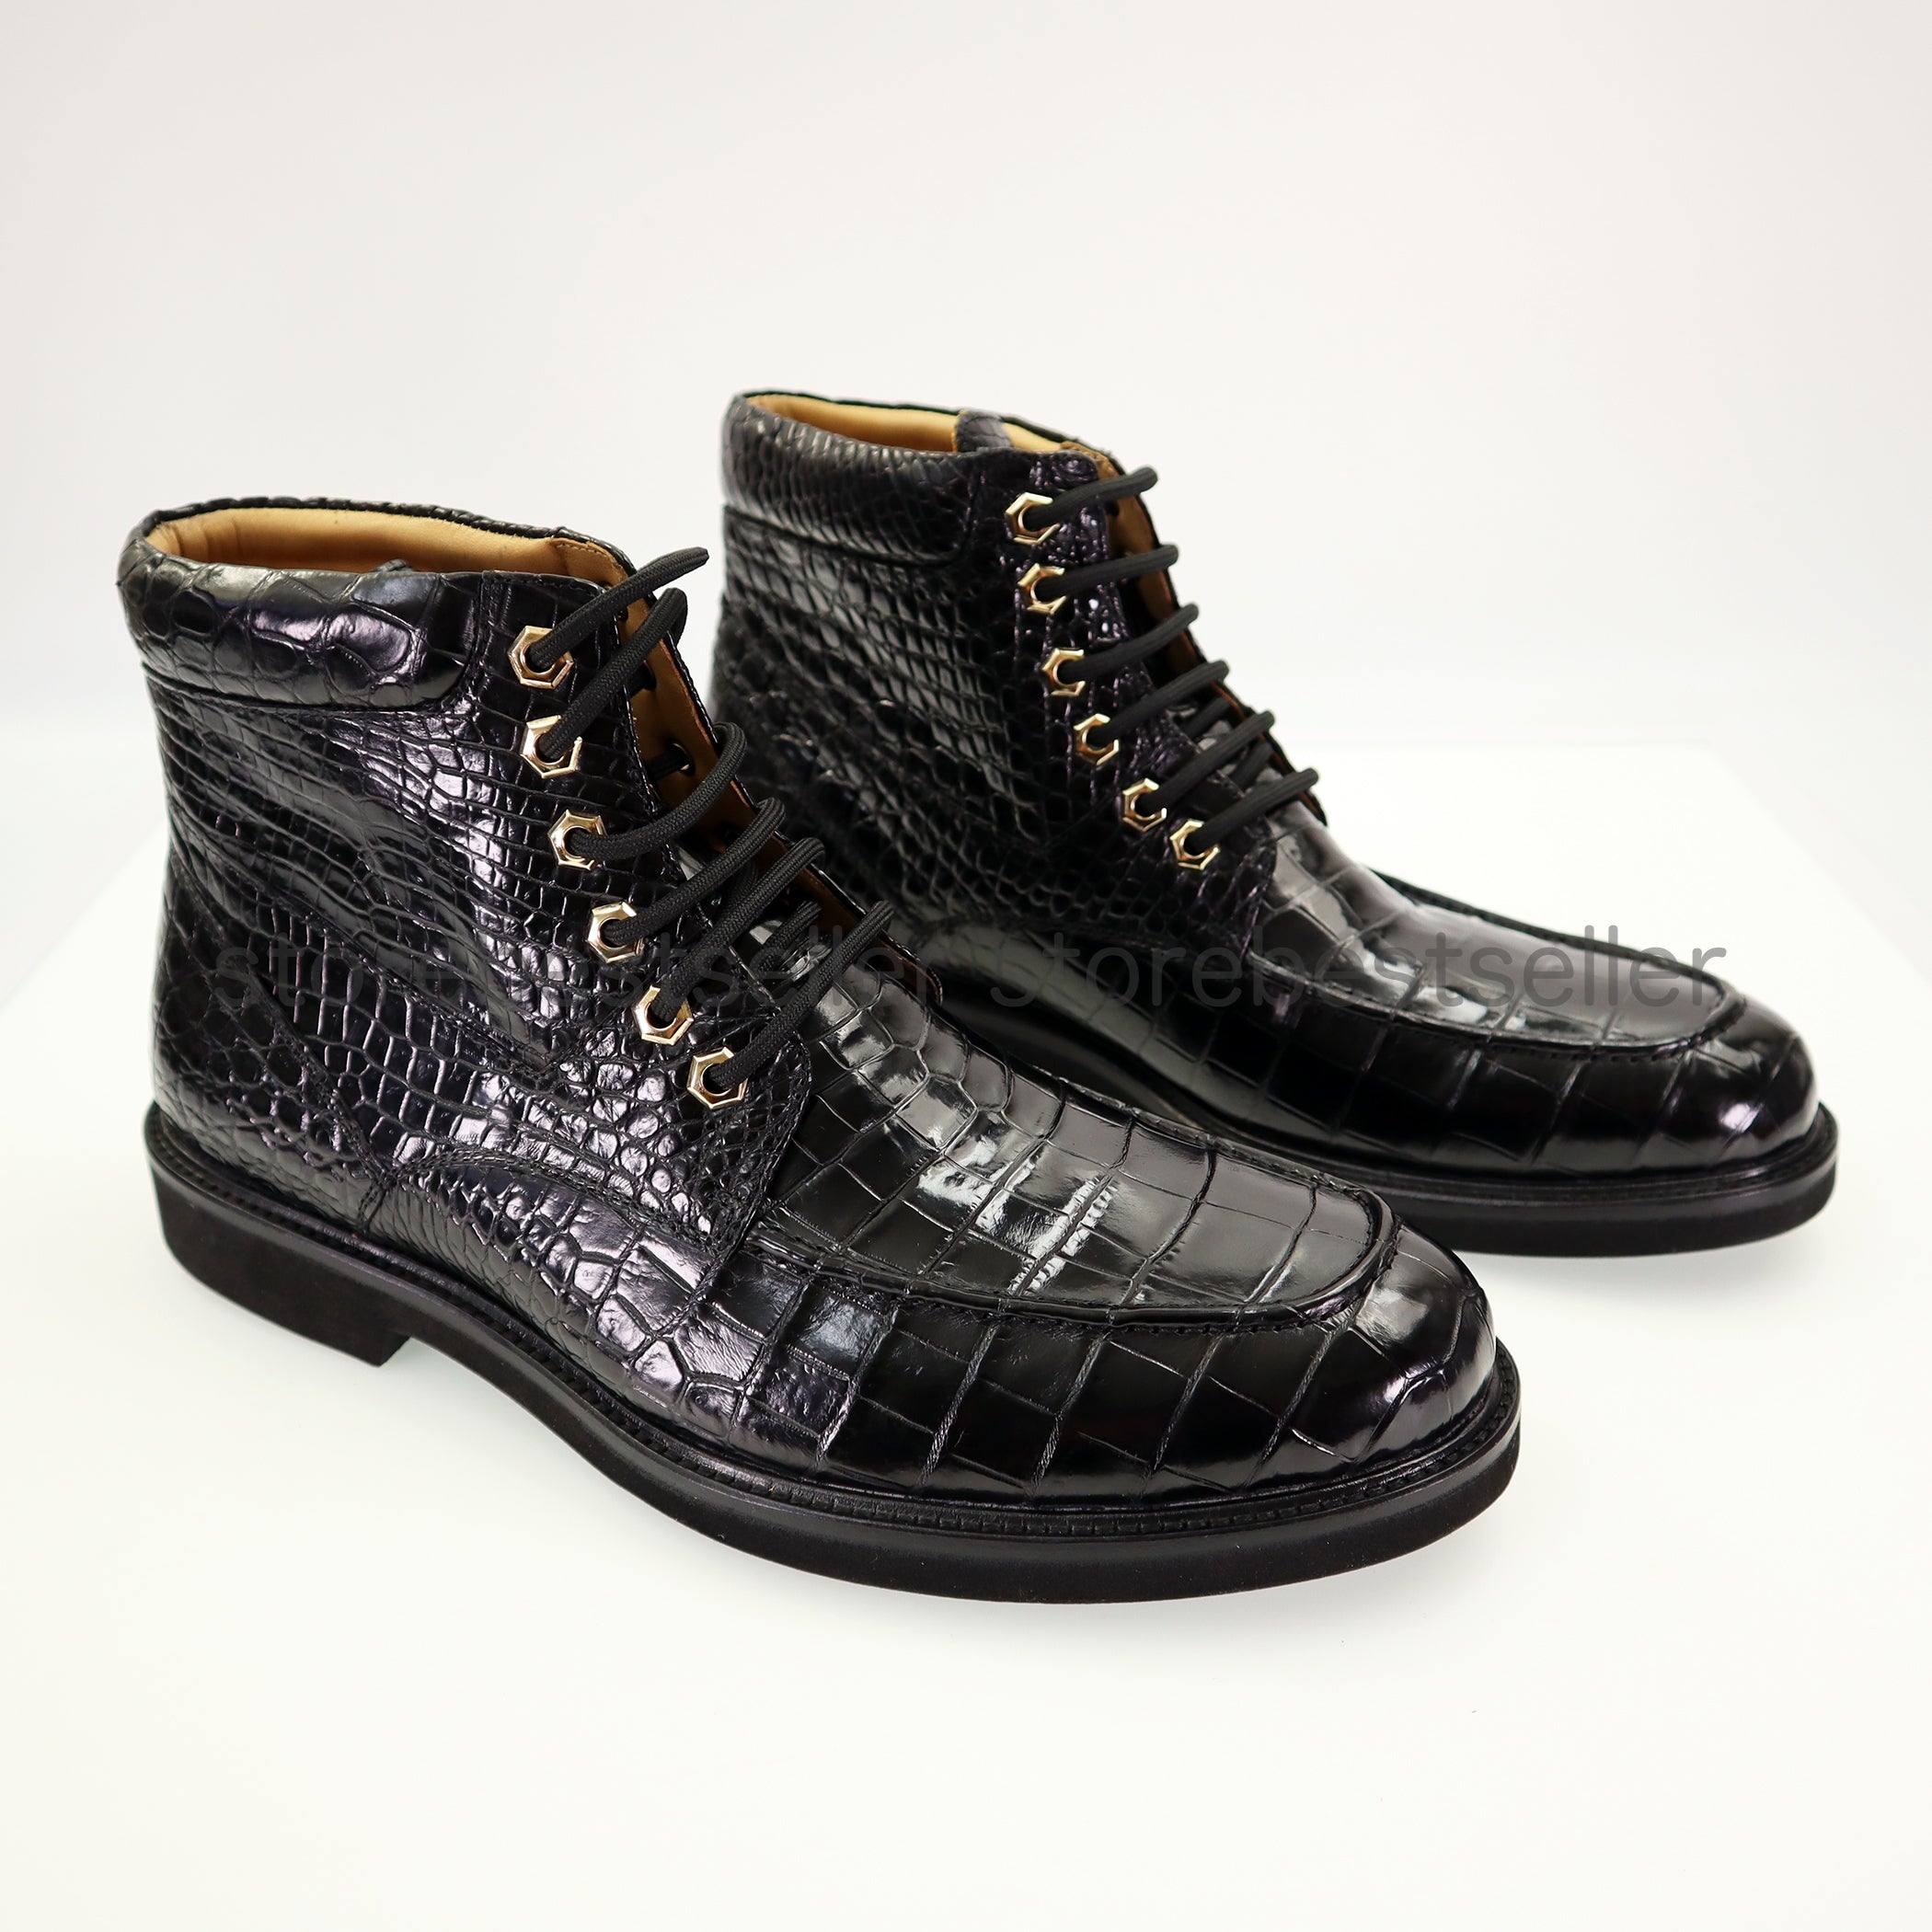 Men’s Handcrafted Alligator Crocodile Leather Dress Shoes Lace up Brogue Shoes